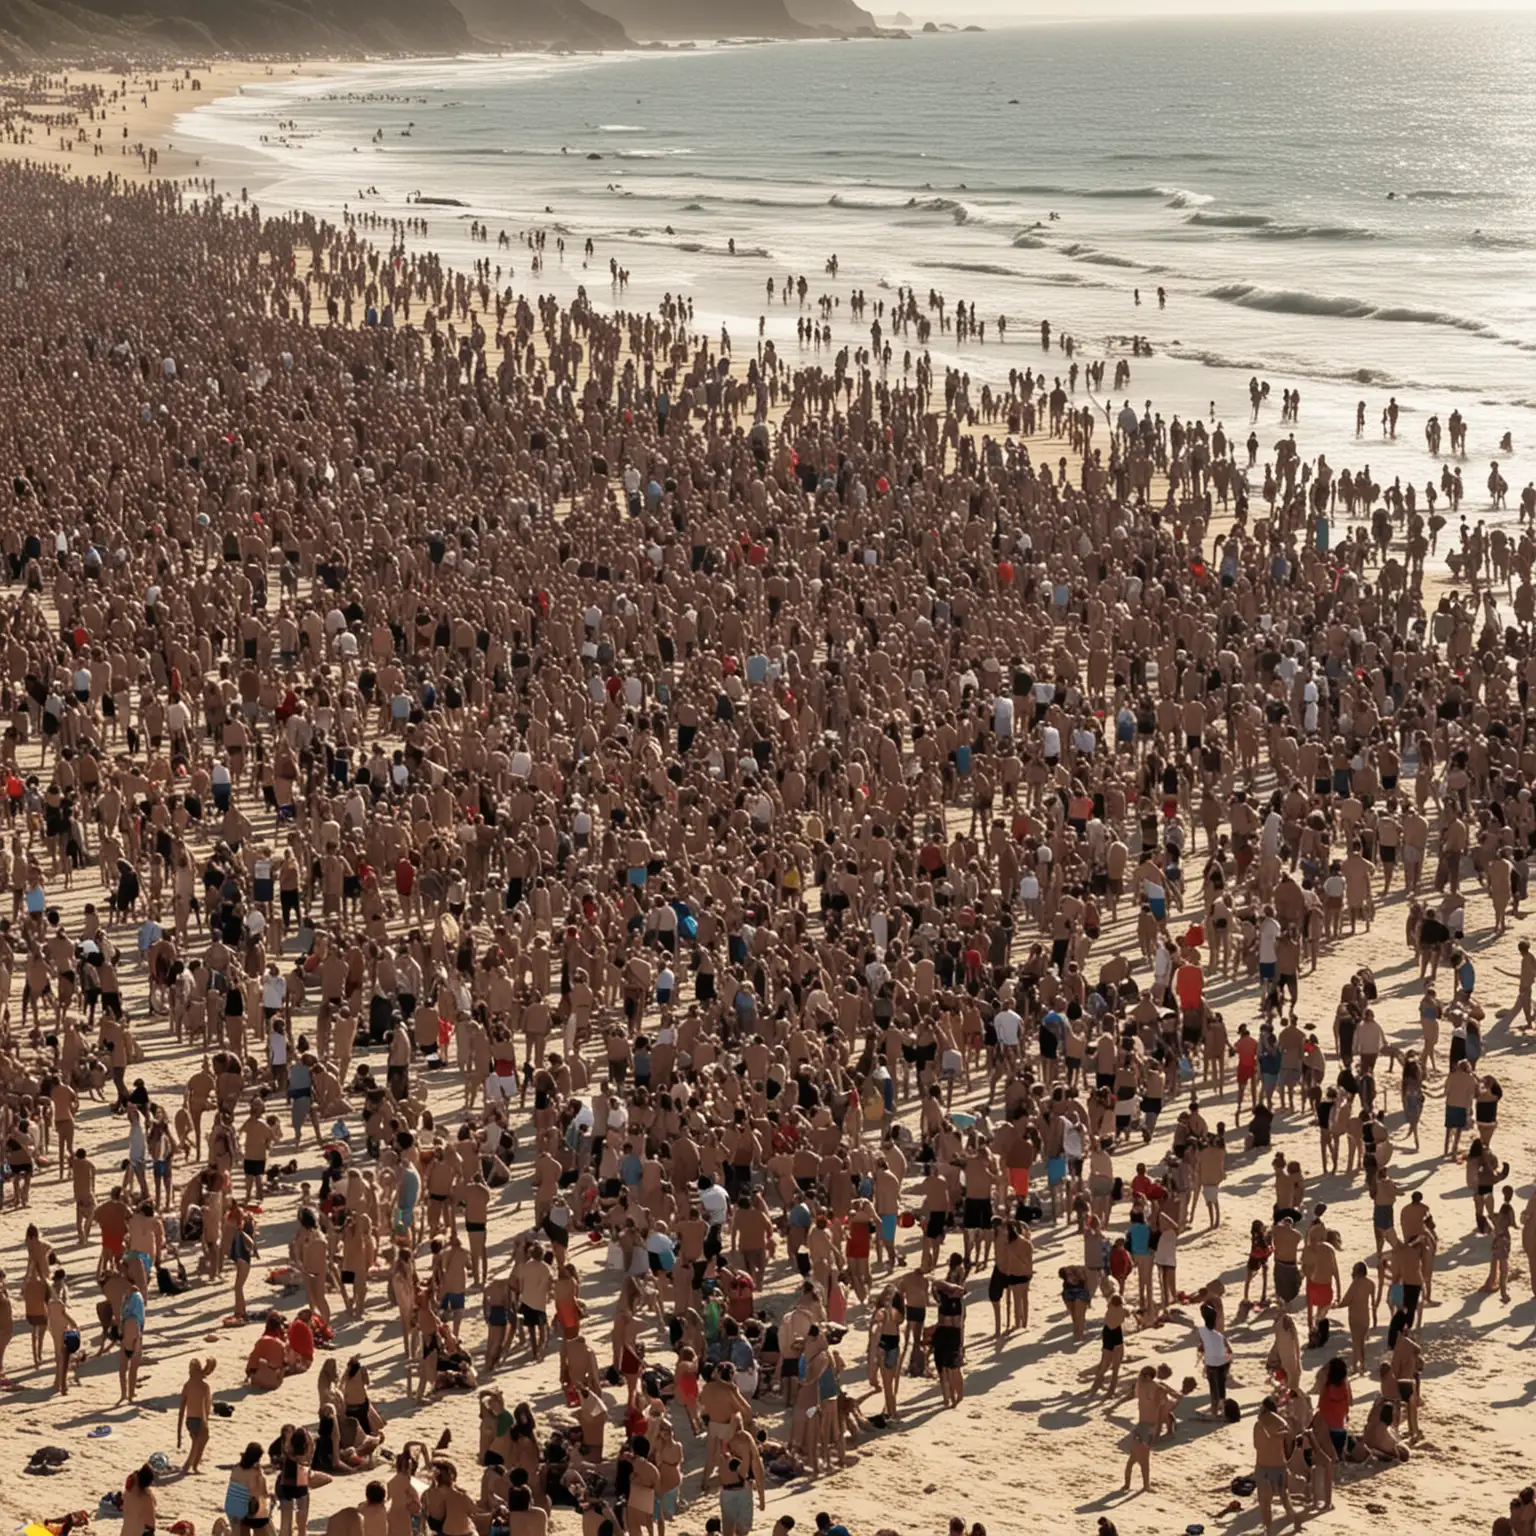 Vibrant Beach Party Scene with Crowds Celebrating Under the Sun